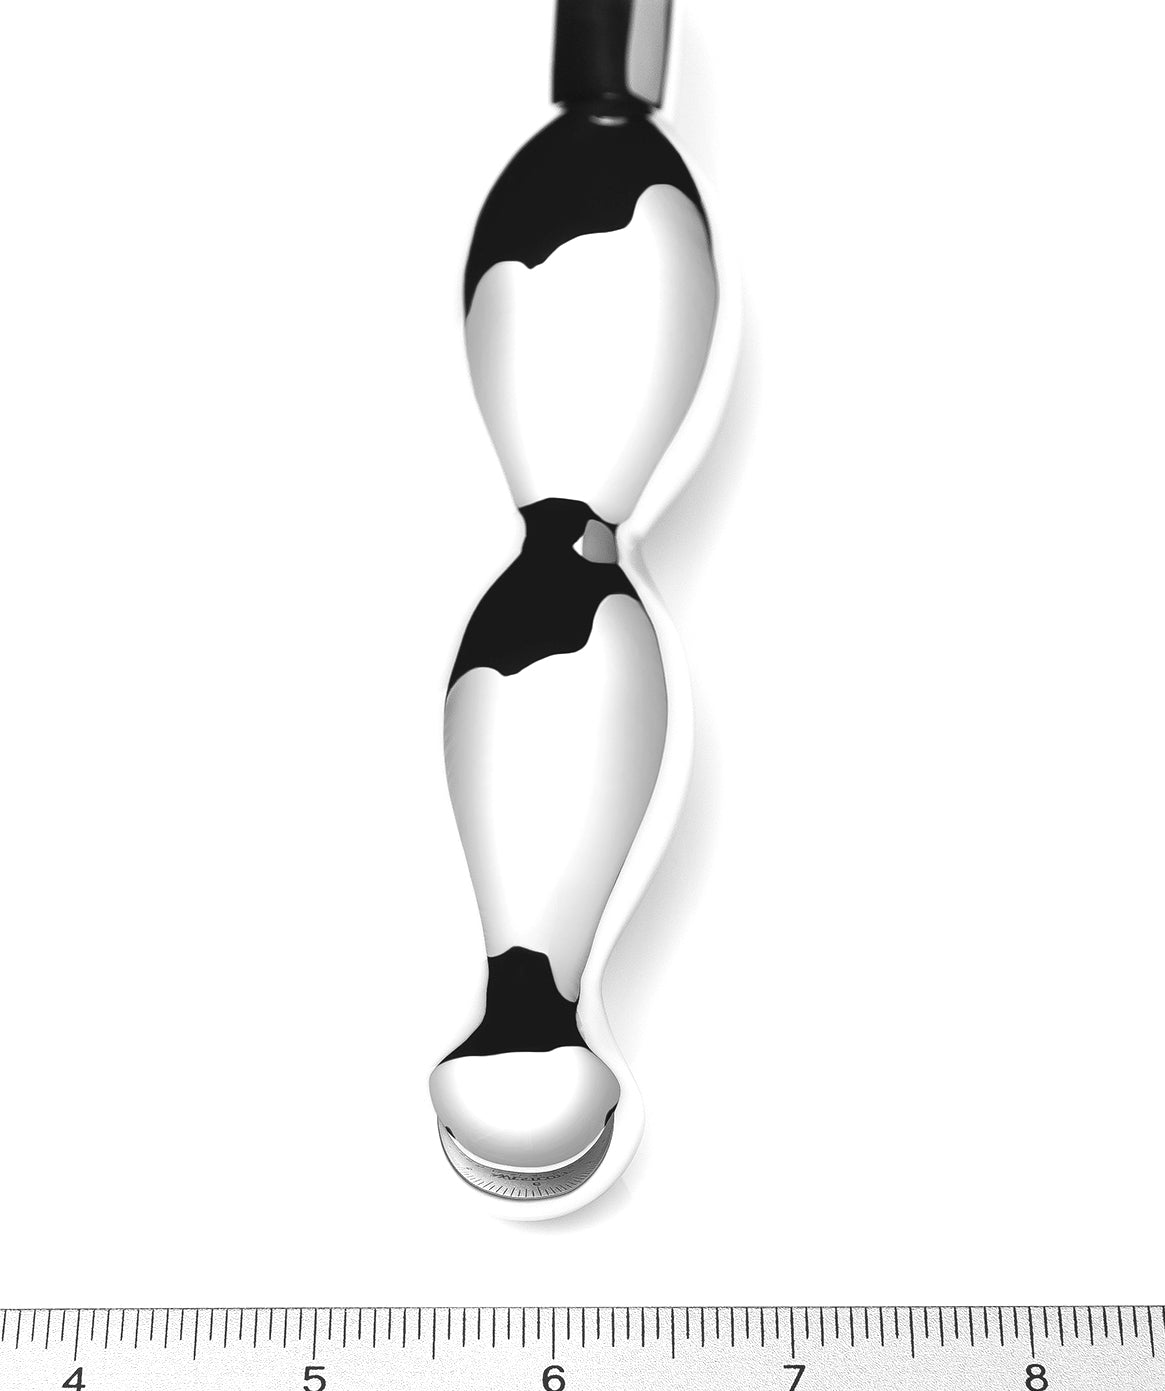 THE RIPPLE EXTREME STEELS DILDO